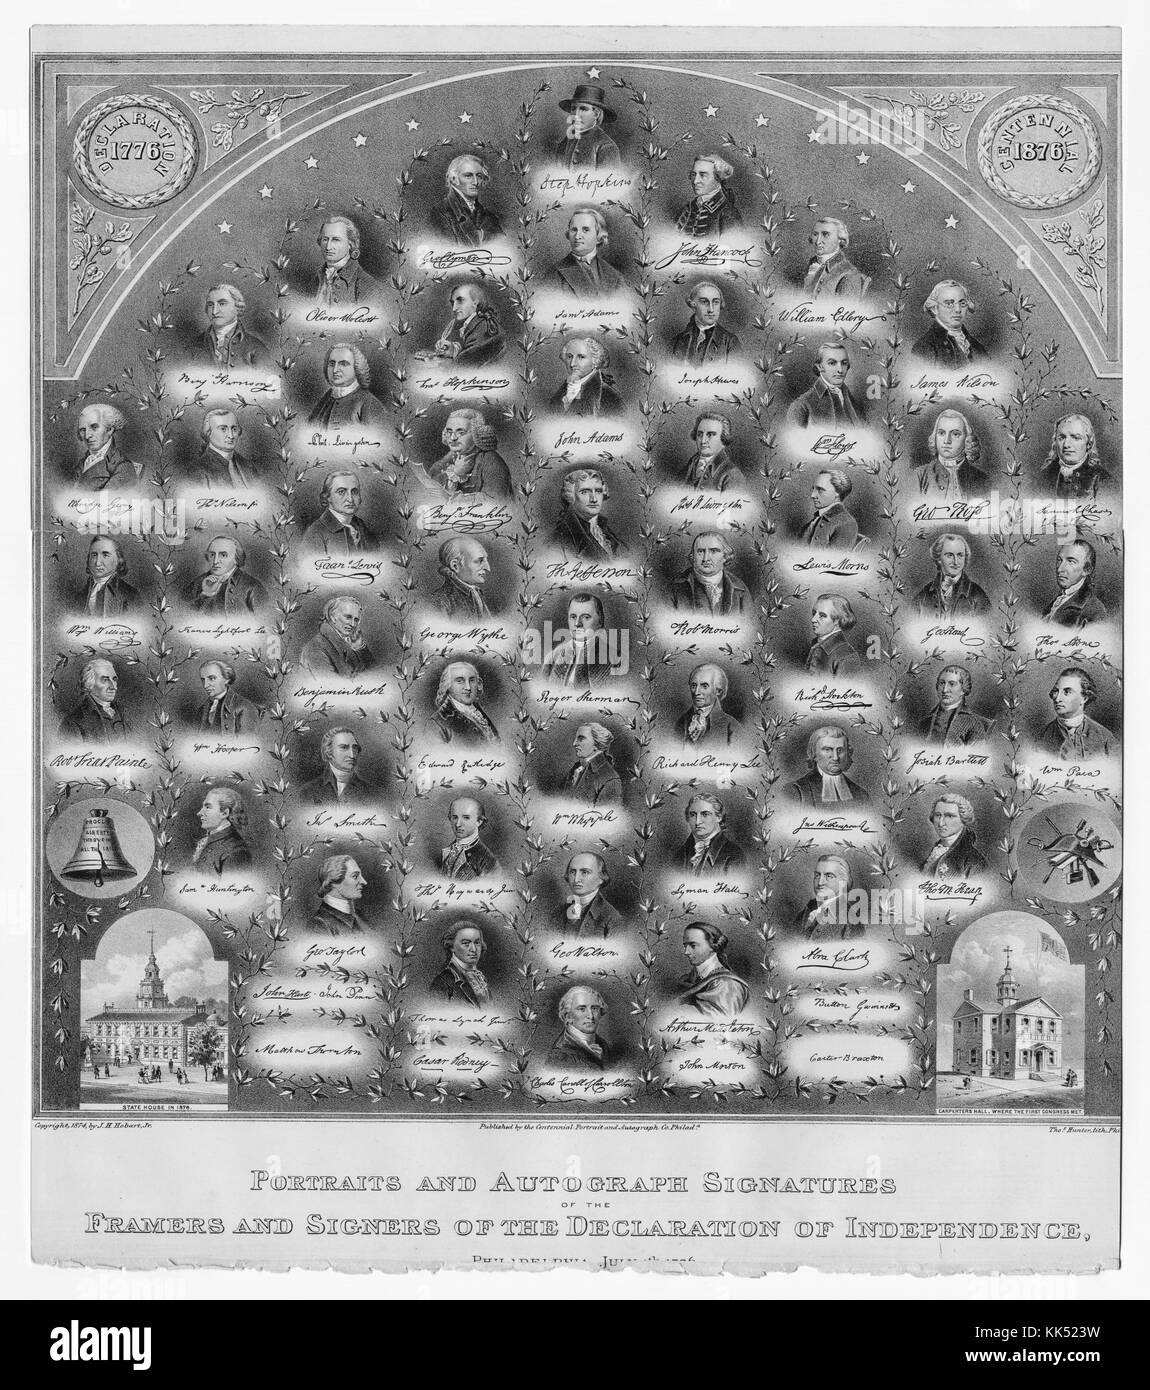 Lithograph depicting the portraits of all the signers of the Declaration of Independence, titled 'Portraits and Autograph Signatures of the Framers and Signers of the Declaration of Independence', published by Centennial Portrait and Autograph Company, Philadelphia, Pennsylvania, 1874. From the New York Public Library. Stock Photo